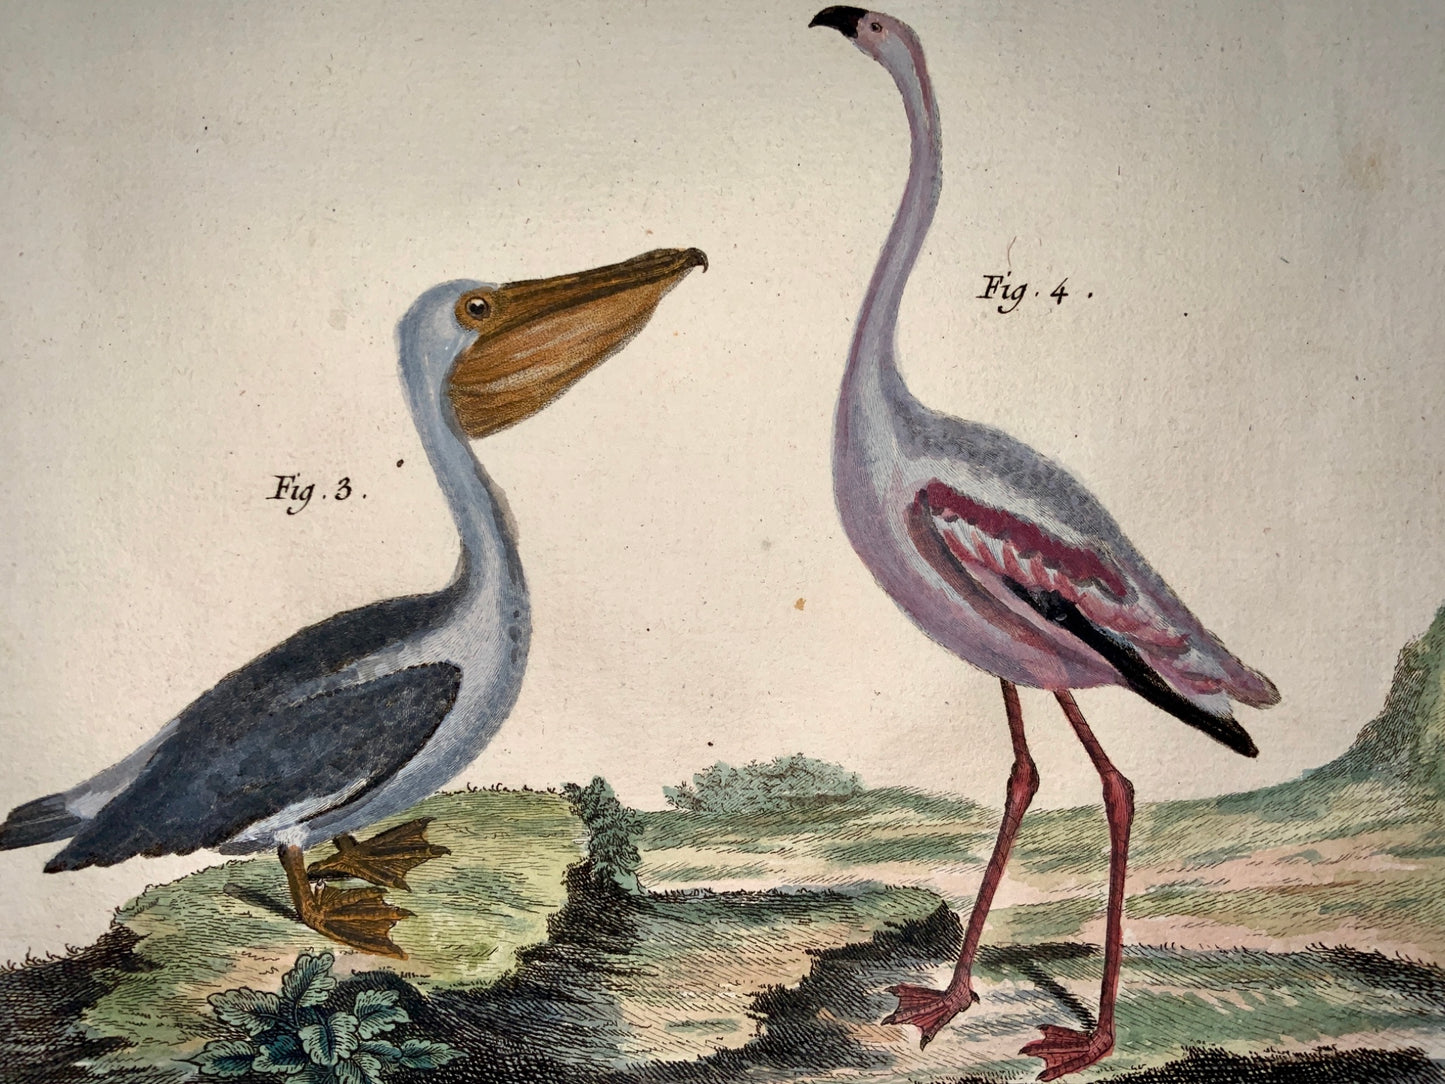 1780 Martinet - PELICAN FLAMINGO OSTRICH - hand coloured 38 cm engraving - Ornithology